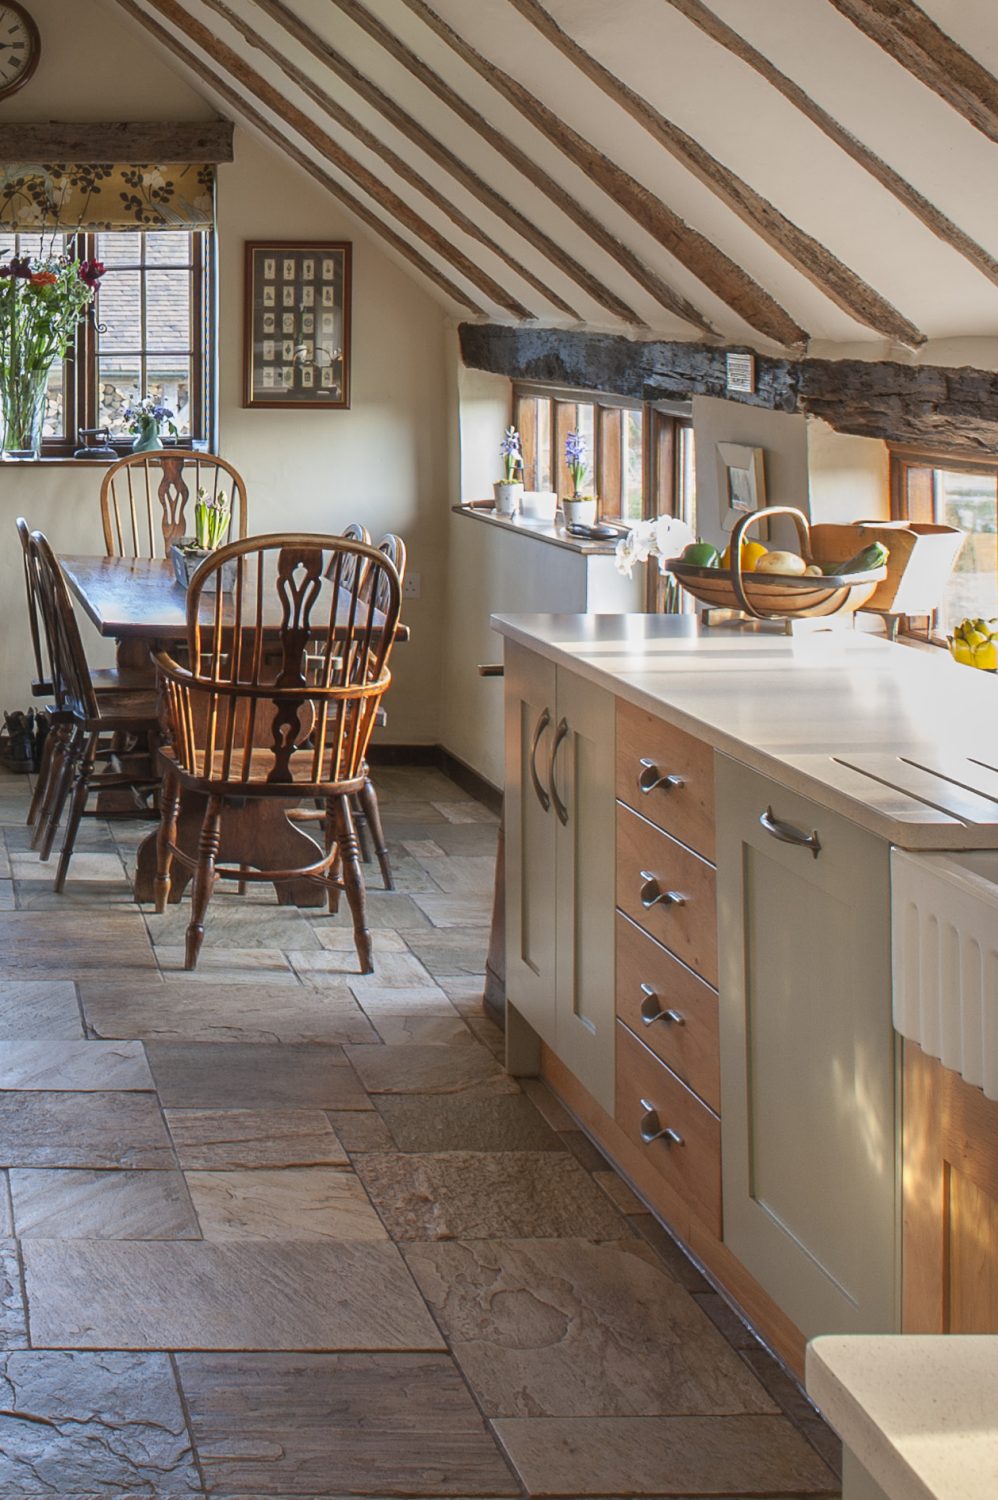 The kitchen’s flag-stone floor was already in place when the couple bought the farmhouse and is ideal in a household where visitors often have muddy wellies – or muddy paws